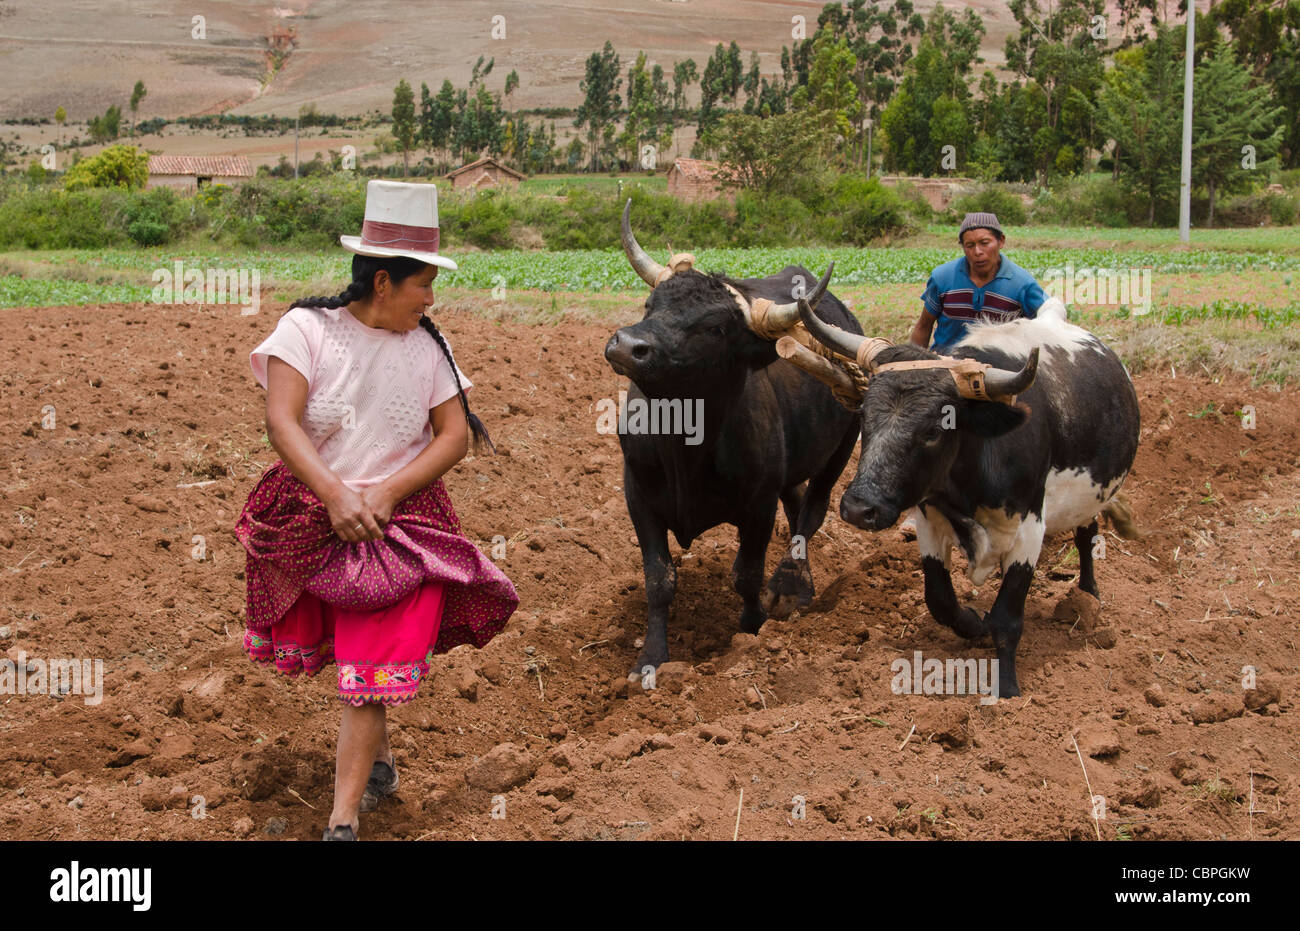 Farming images of couple working with oxen on farm in small town of Chinchero Peru South America Stock Photo